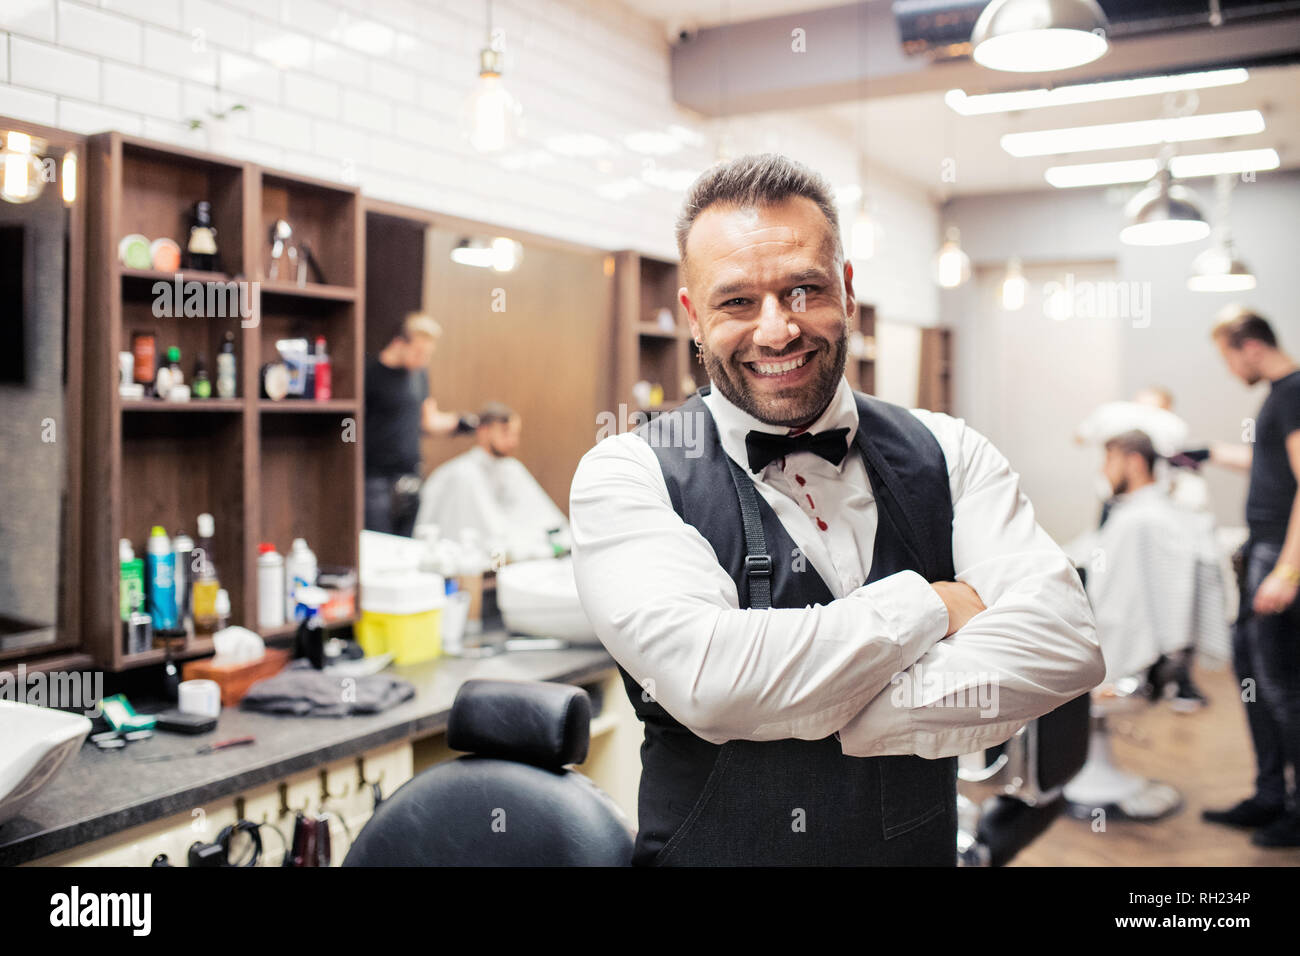 Young handsome haidresser and hairstylist standing in barber shop, arms crossed. Stock Photo